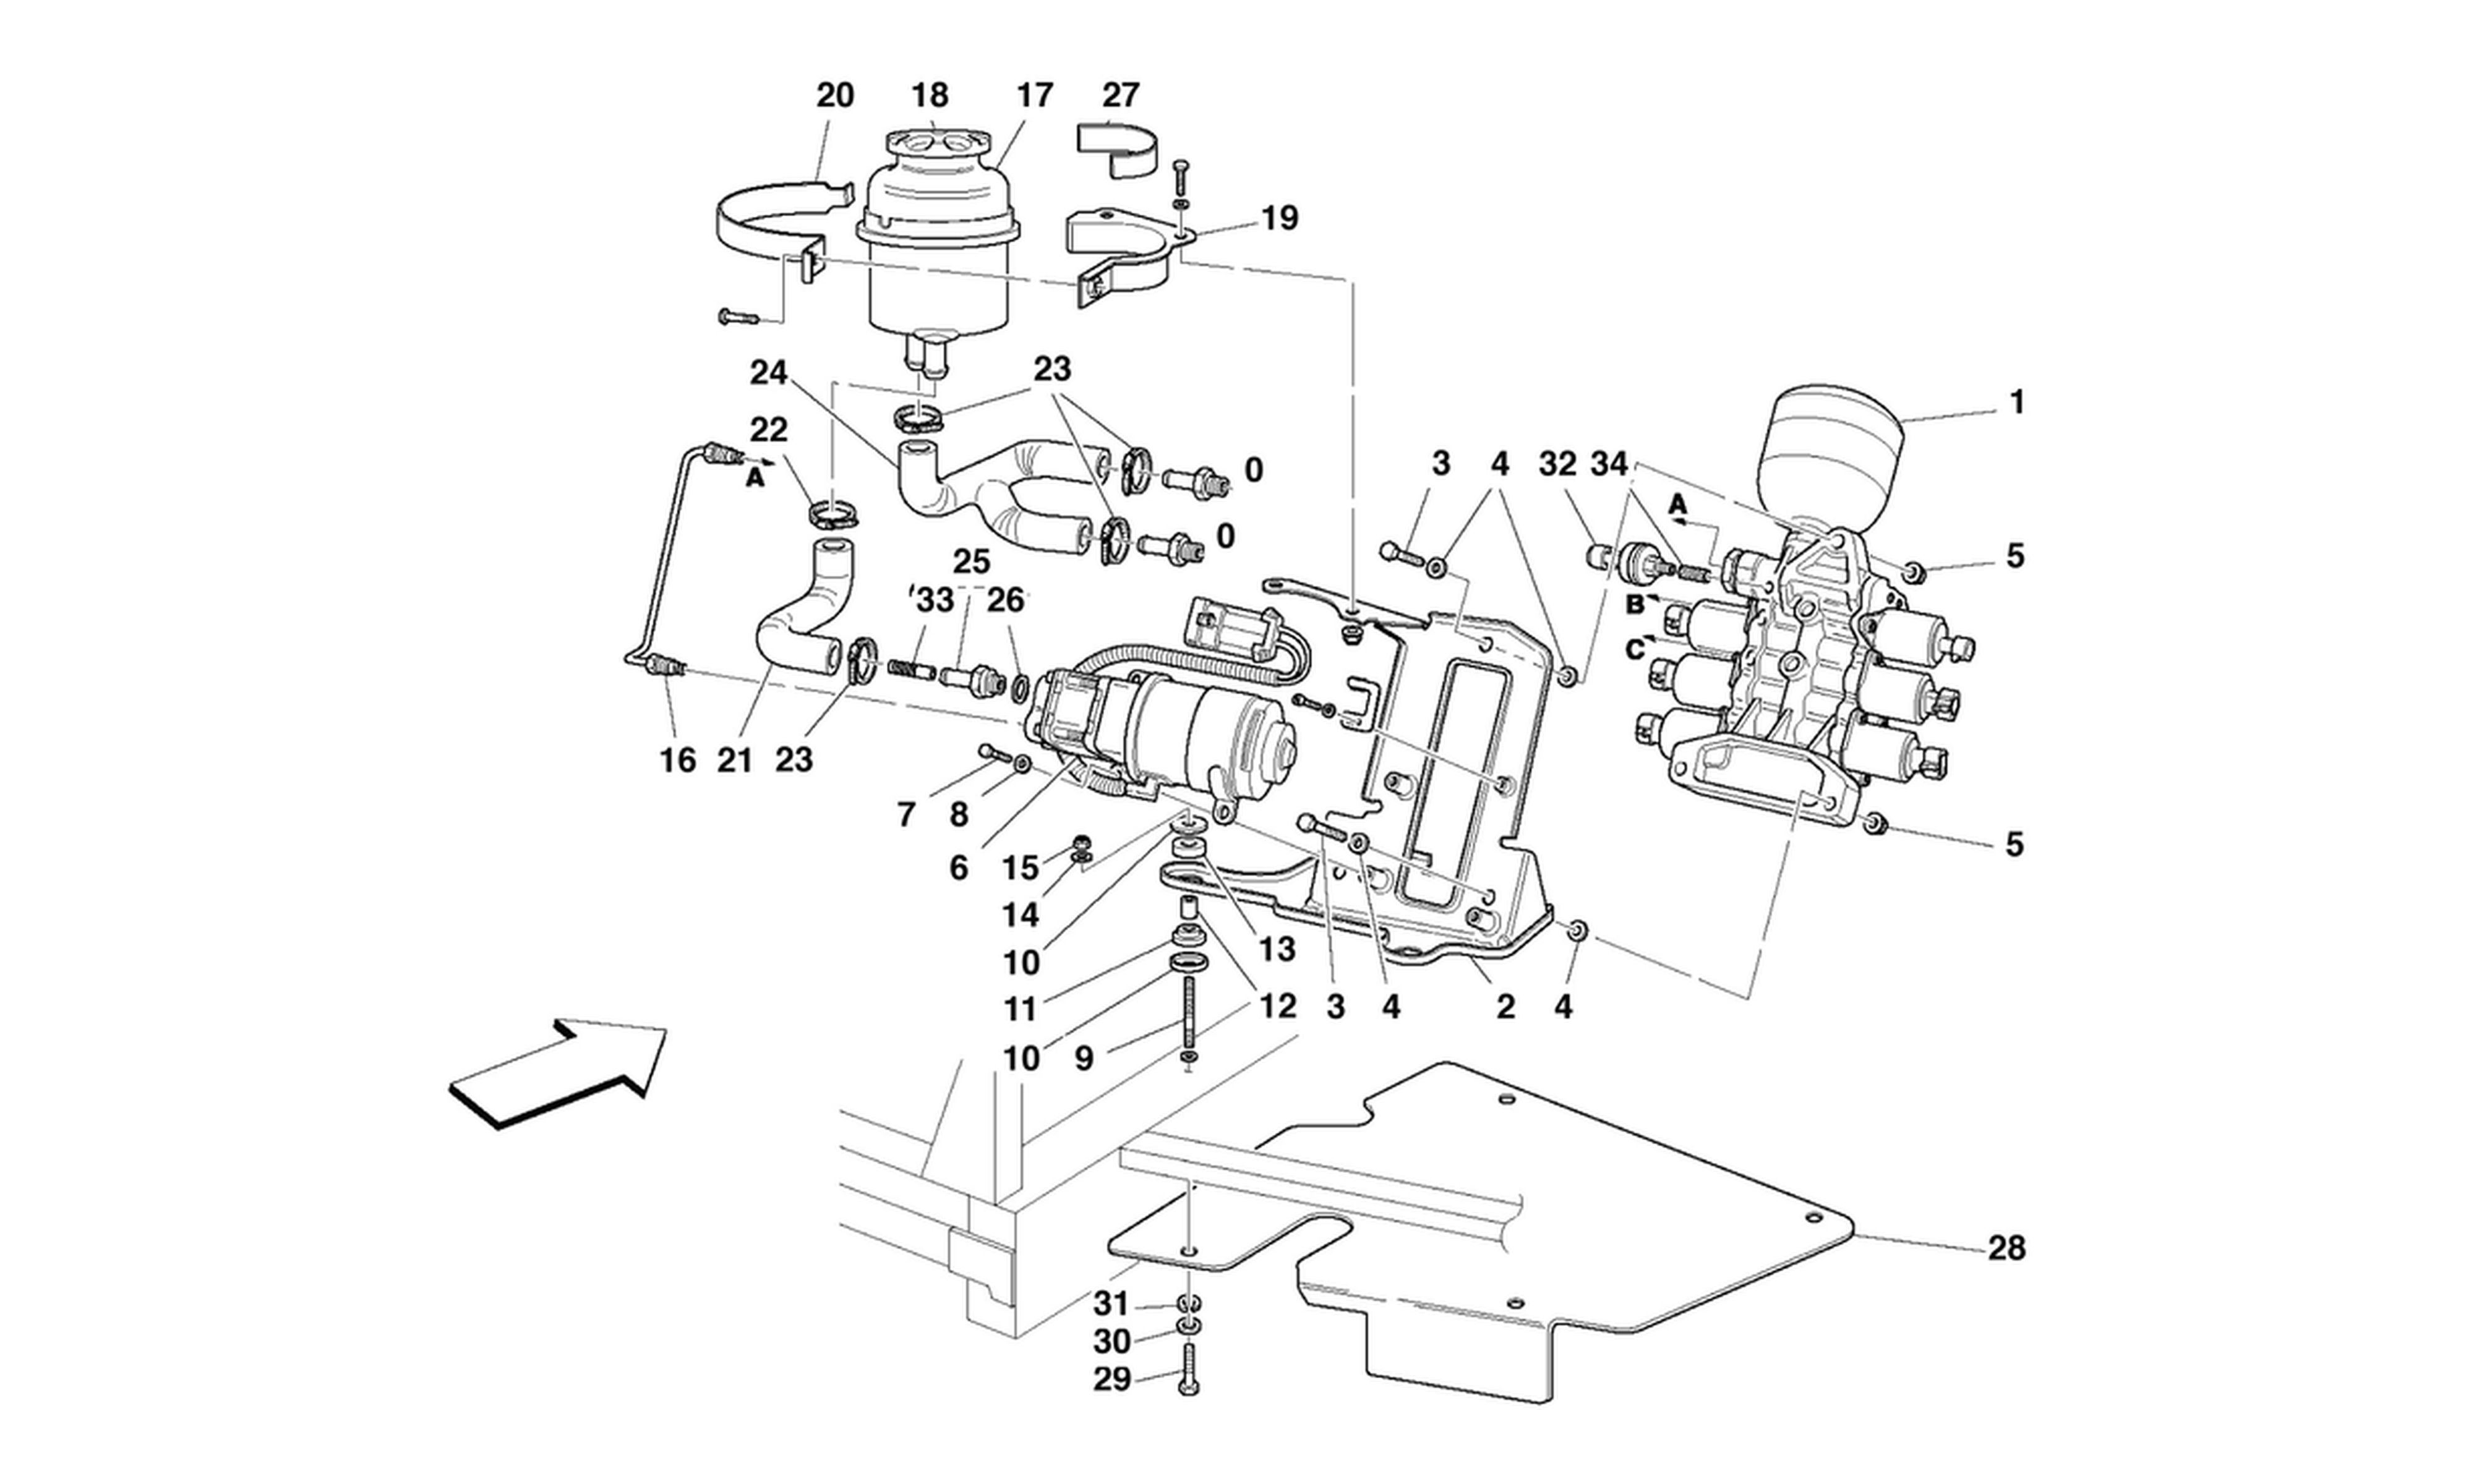 Schematic: Power Unit And Tank -Valid For F1-